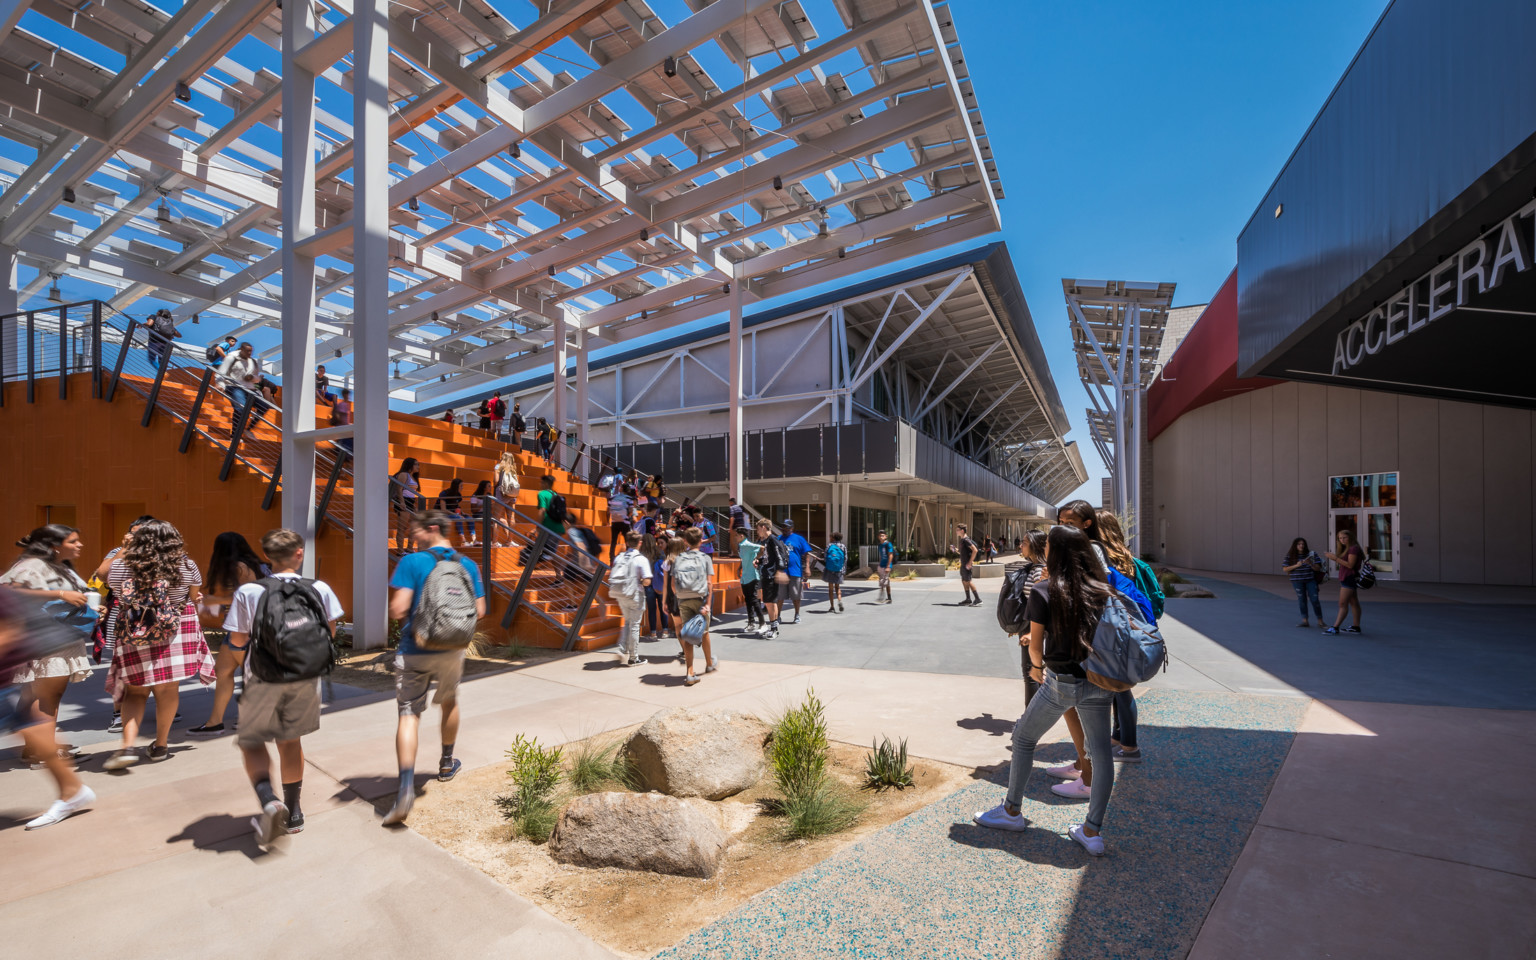 outdoor multifunction space at a STEM high school in the southwest united states